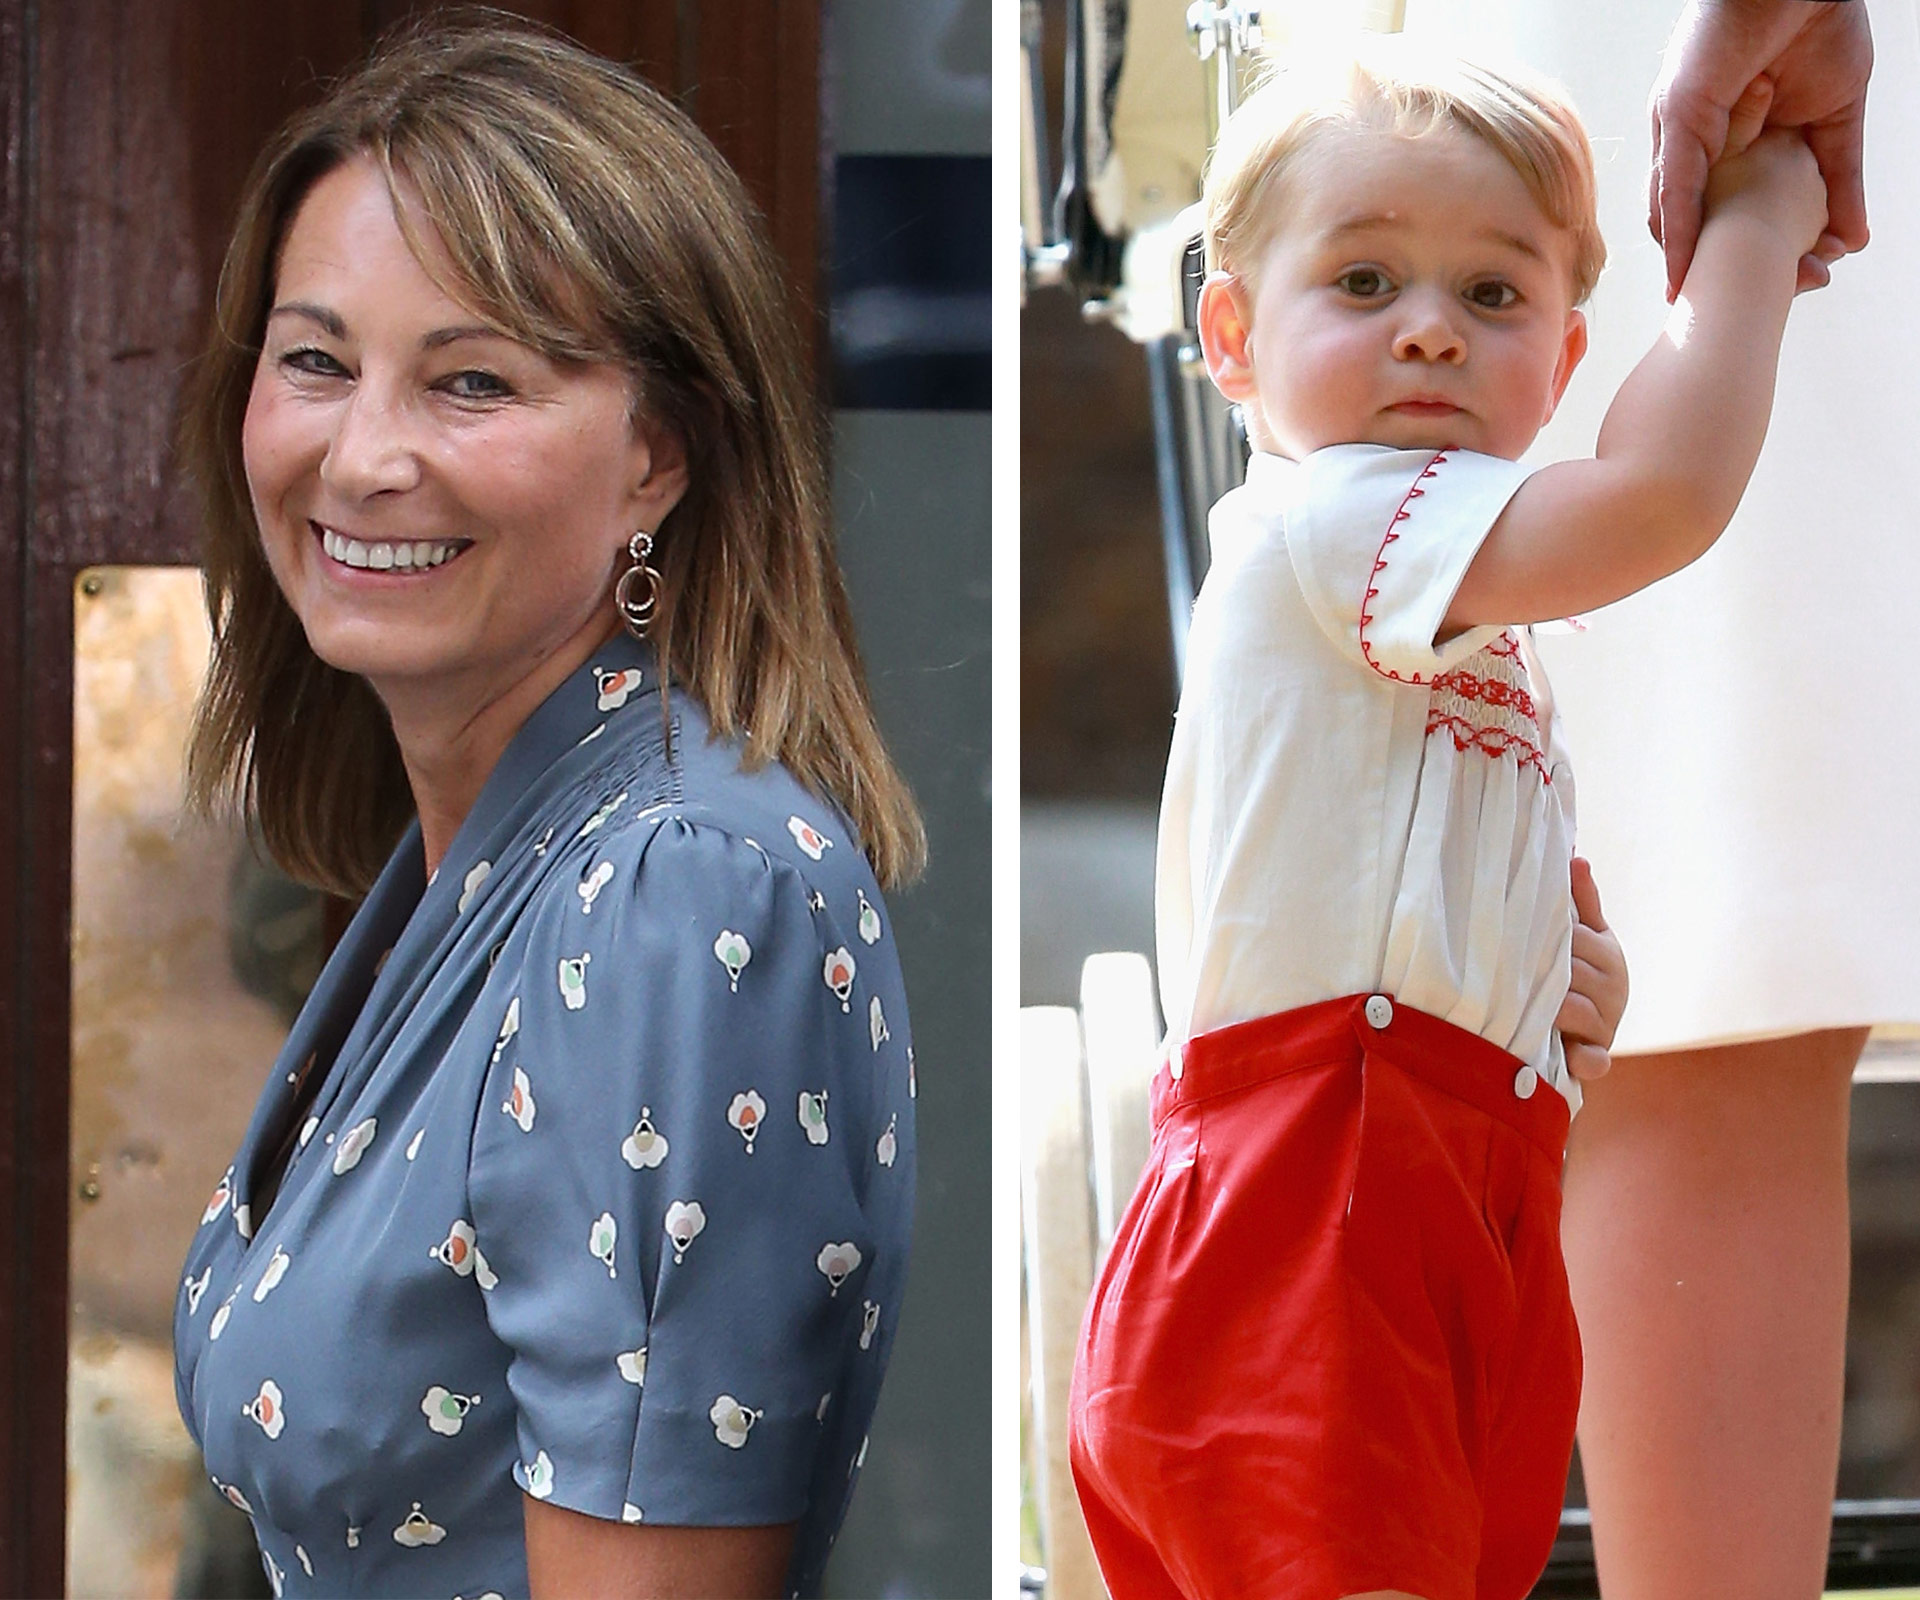 Prince George and Carole Middleton